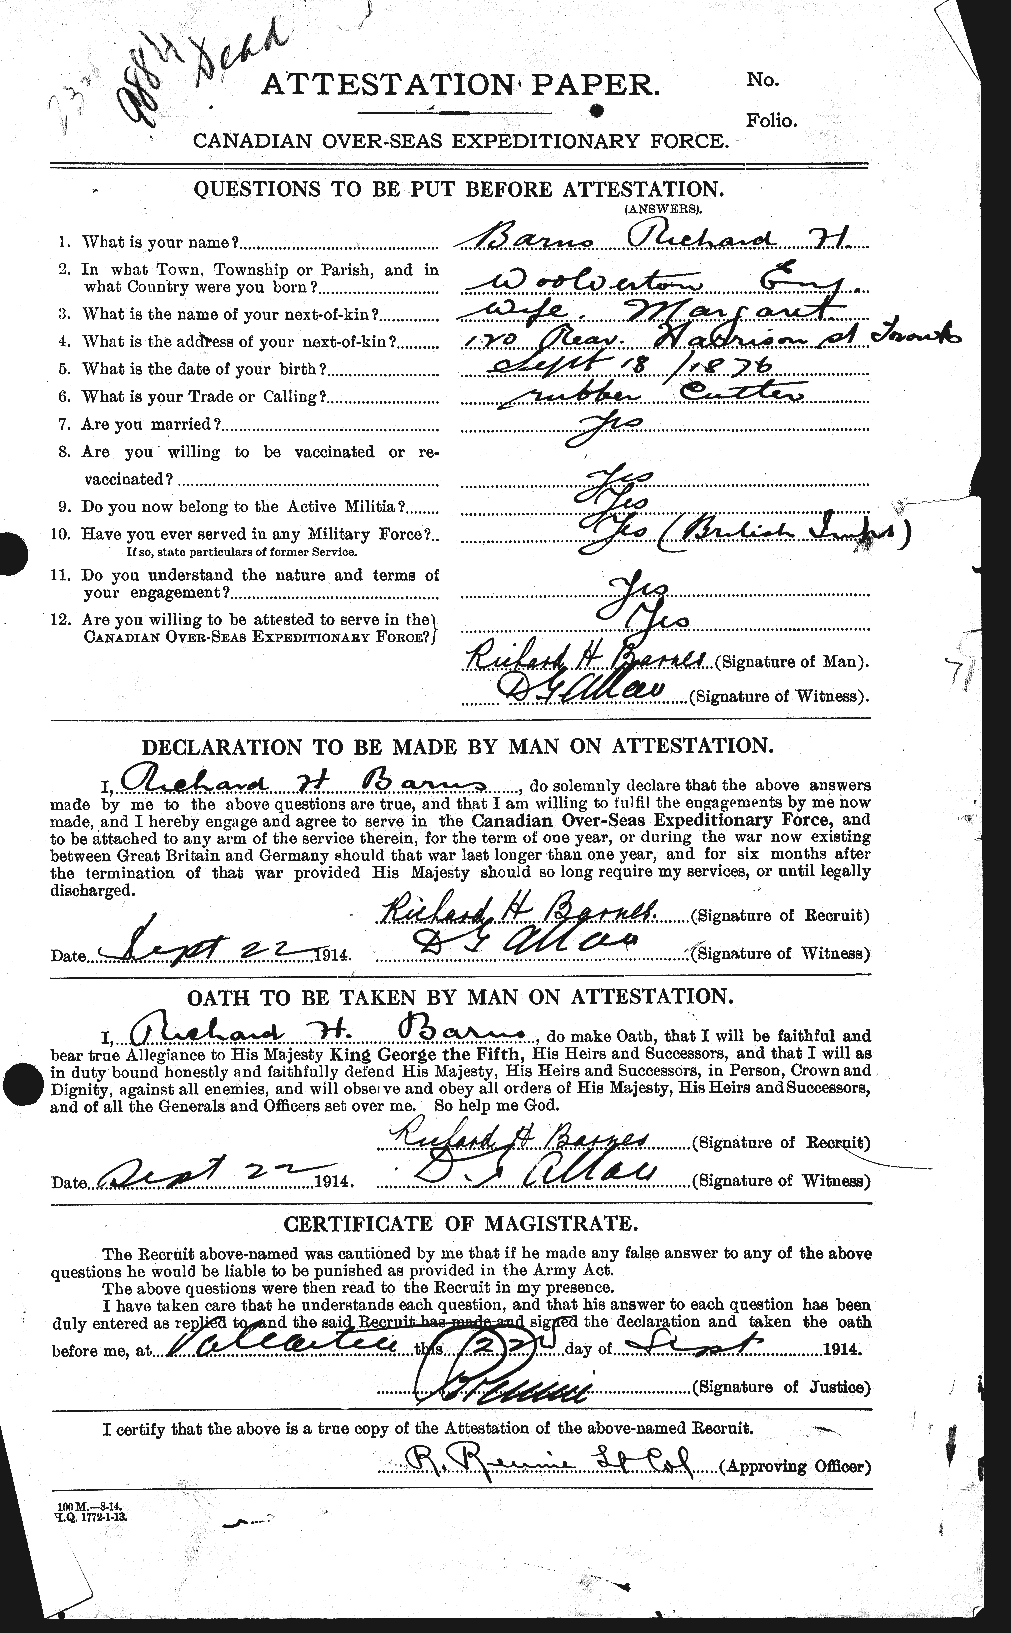 Personnel Records of the First World War - CEF 222774a